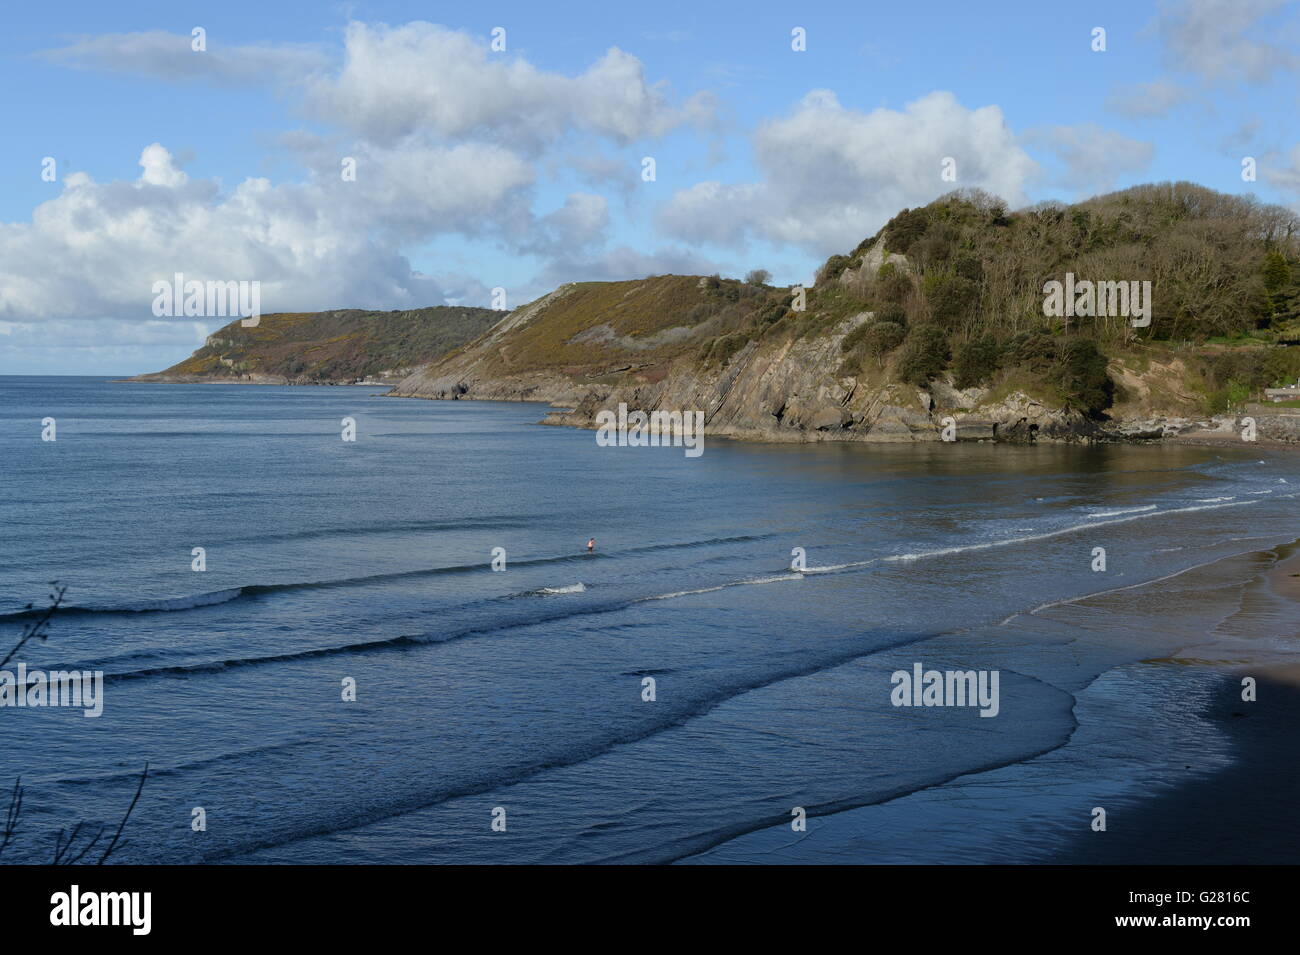 Shelterd bay in Wales surrounded by cliffs and headlands Stock Photo